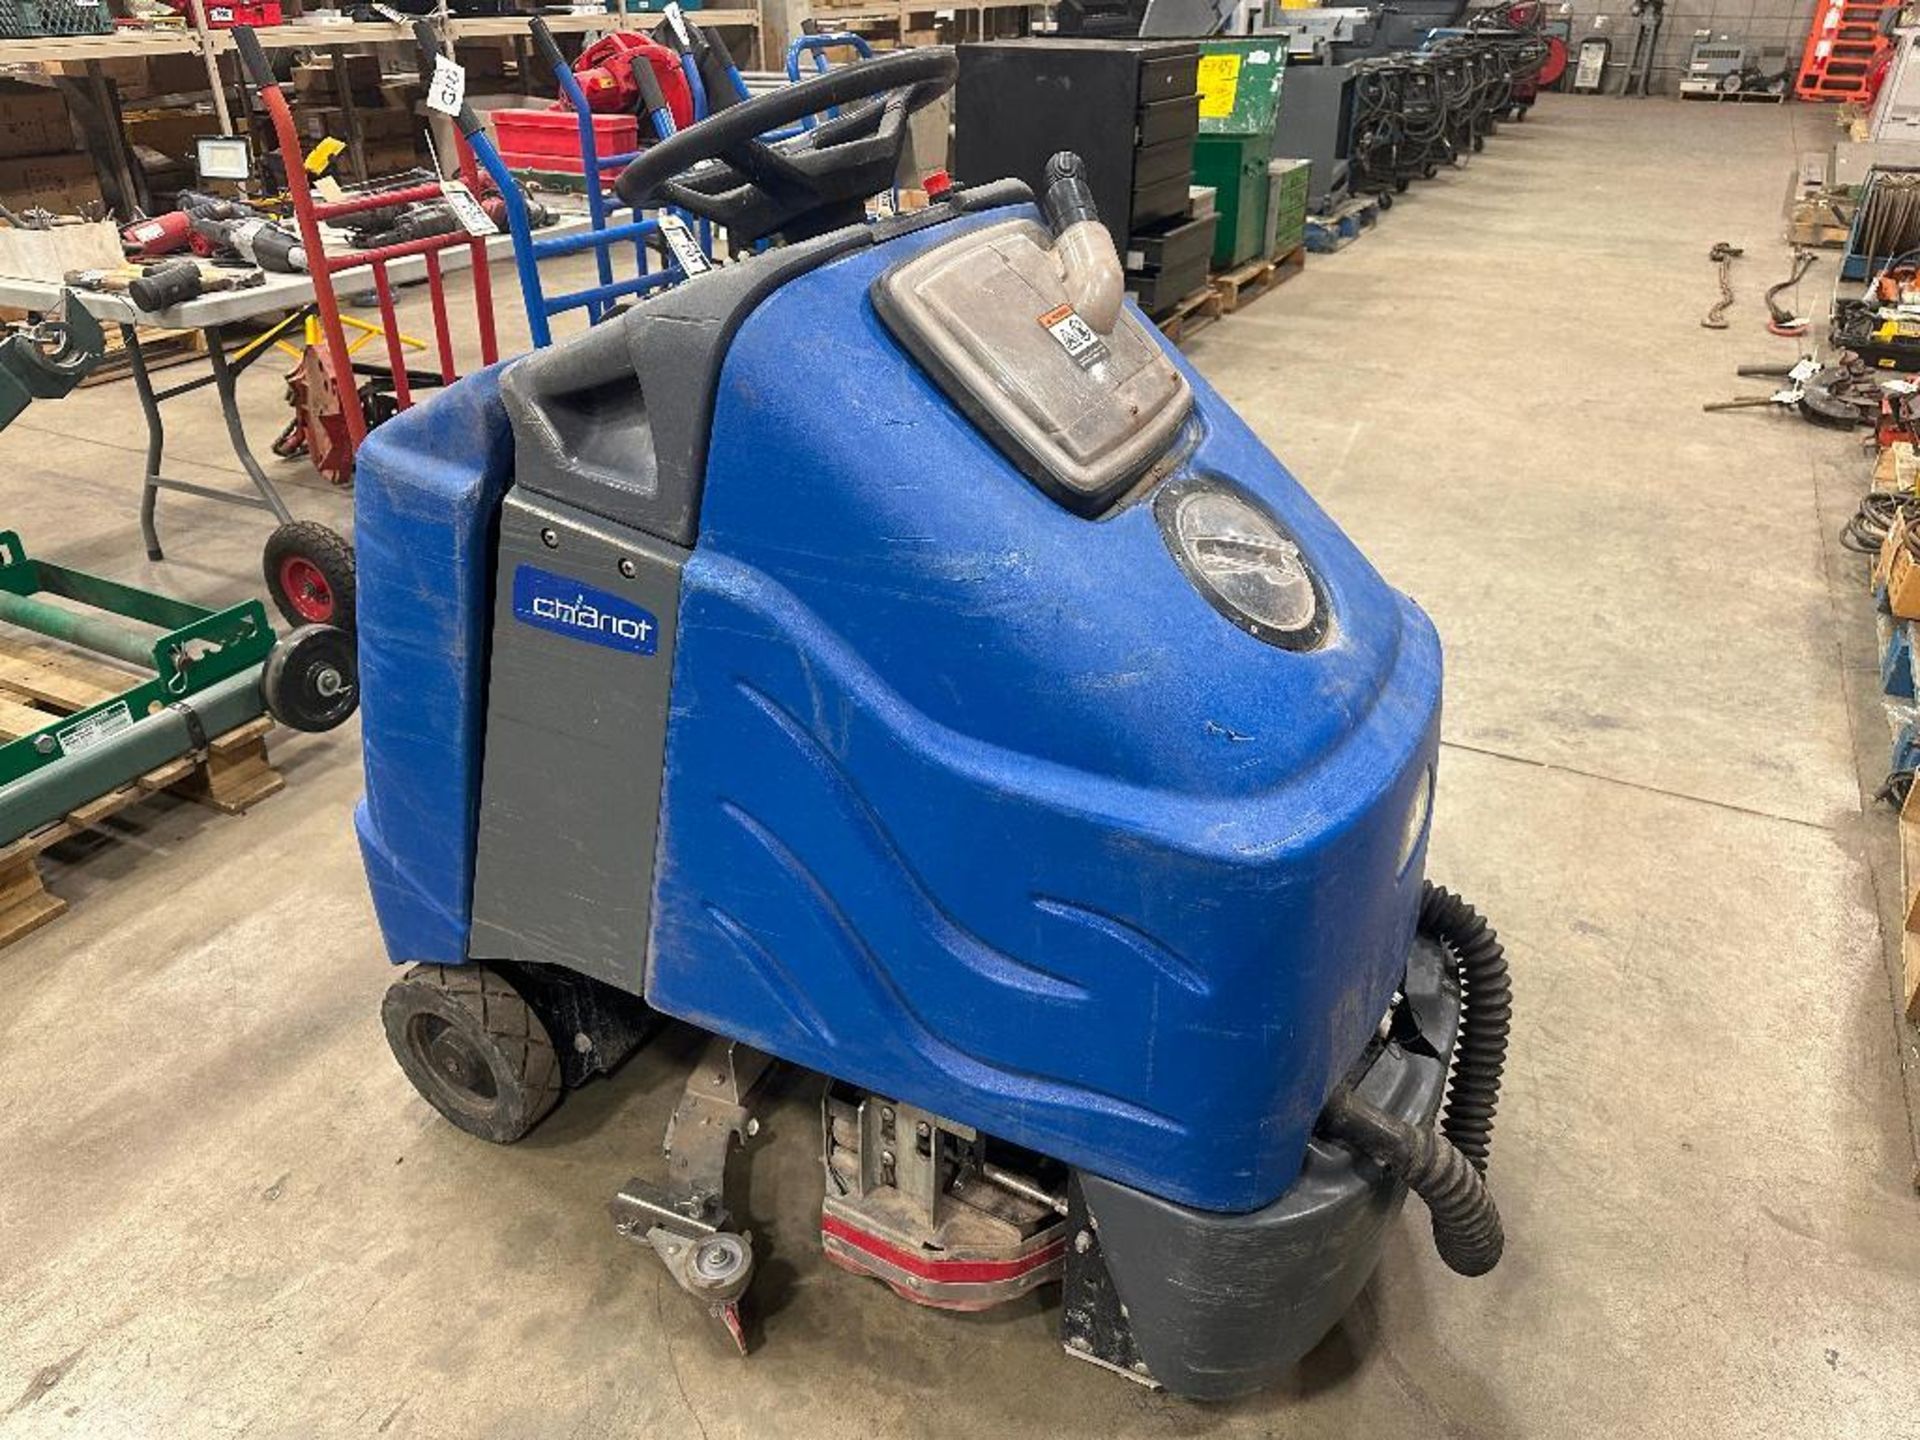 Chariot Commercial Floor Sweeper w. 1654 hours showing - Image 2 of 9